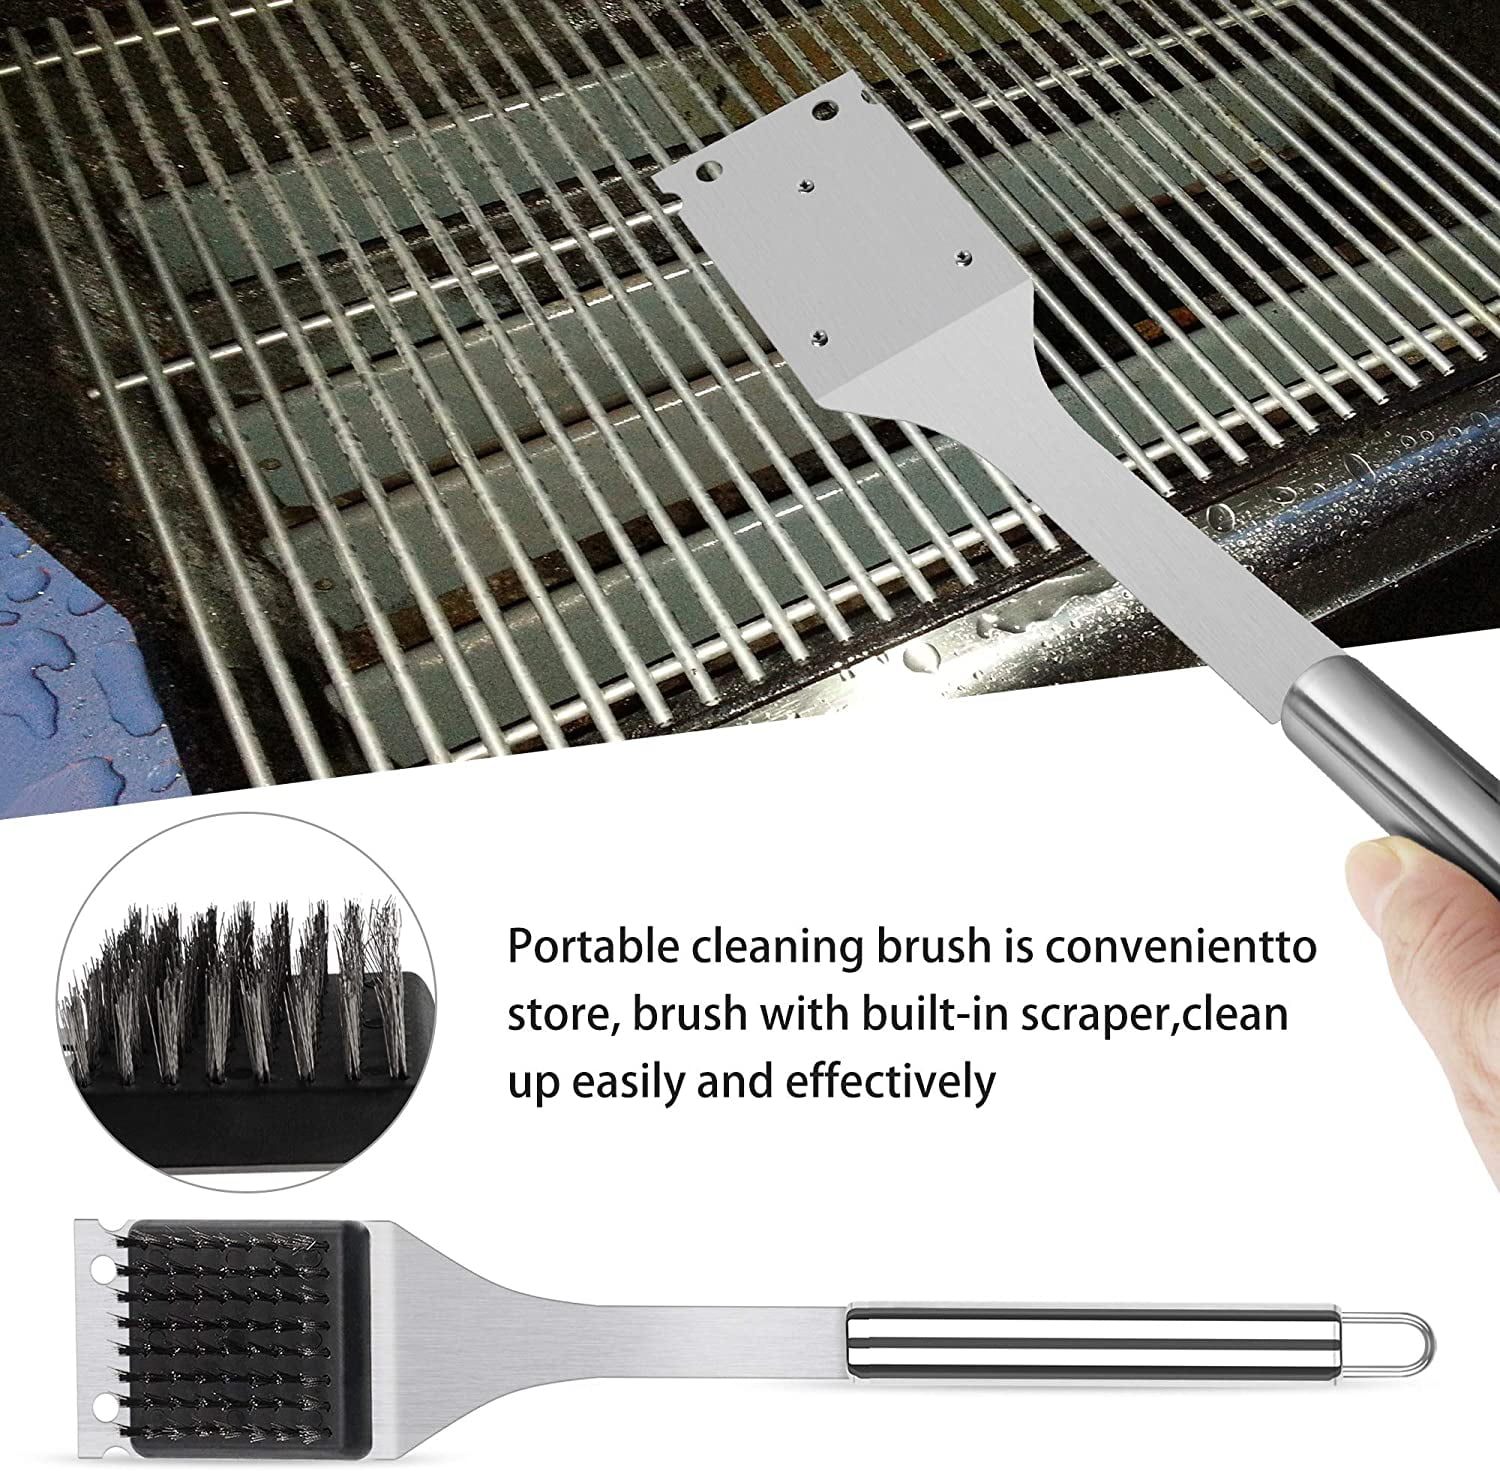 Grilling Brush Fork 14 PCS Stainless Steel Grilling Utensils Set with Knife Spatula,Tong,Skewers,Barbecue Kits for Camping meicent Grill Accessories BBQ Tool Set